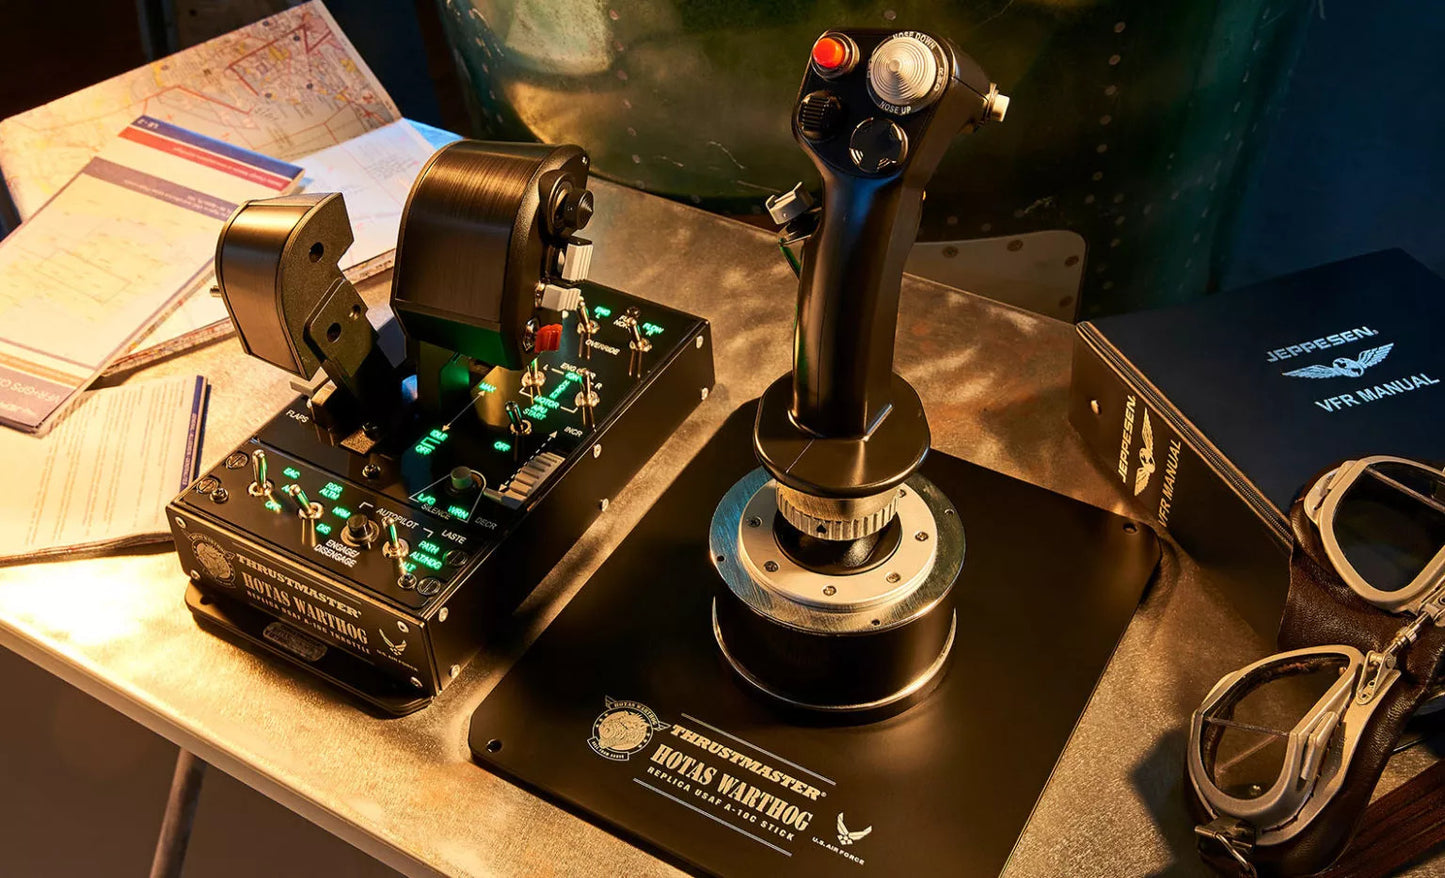 Thrustmaster HOTAS Warthog Flight Stick for Flight Simulation, Official  Replica of the US Air Force A-10C Aircraft (Compatible with PC)